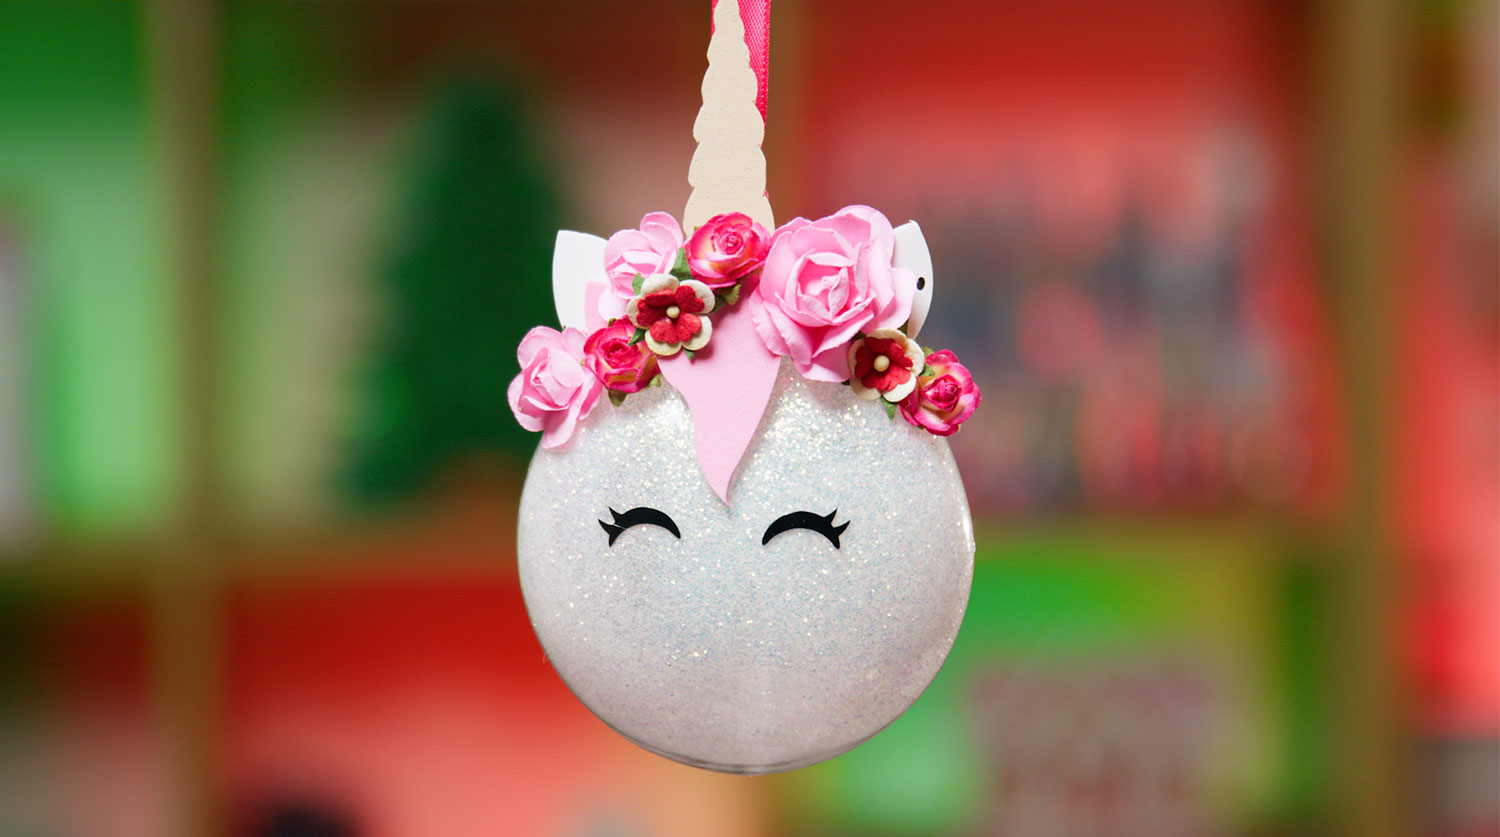 DIY Glitter Ornaments: The EASIEST Way to Glitter Ornaments